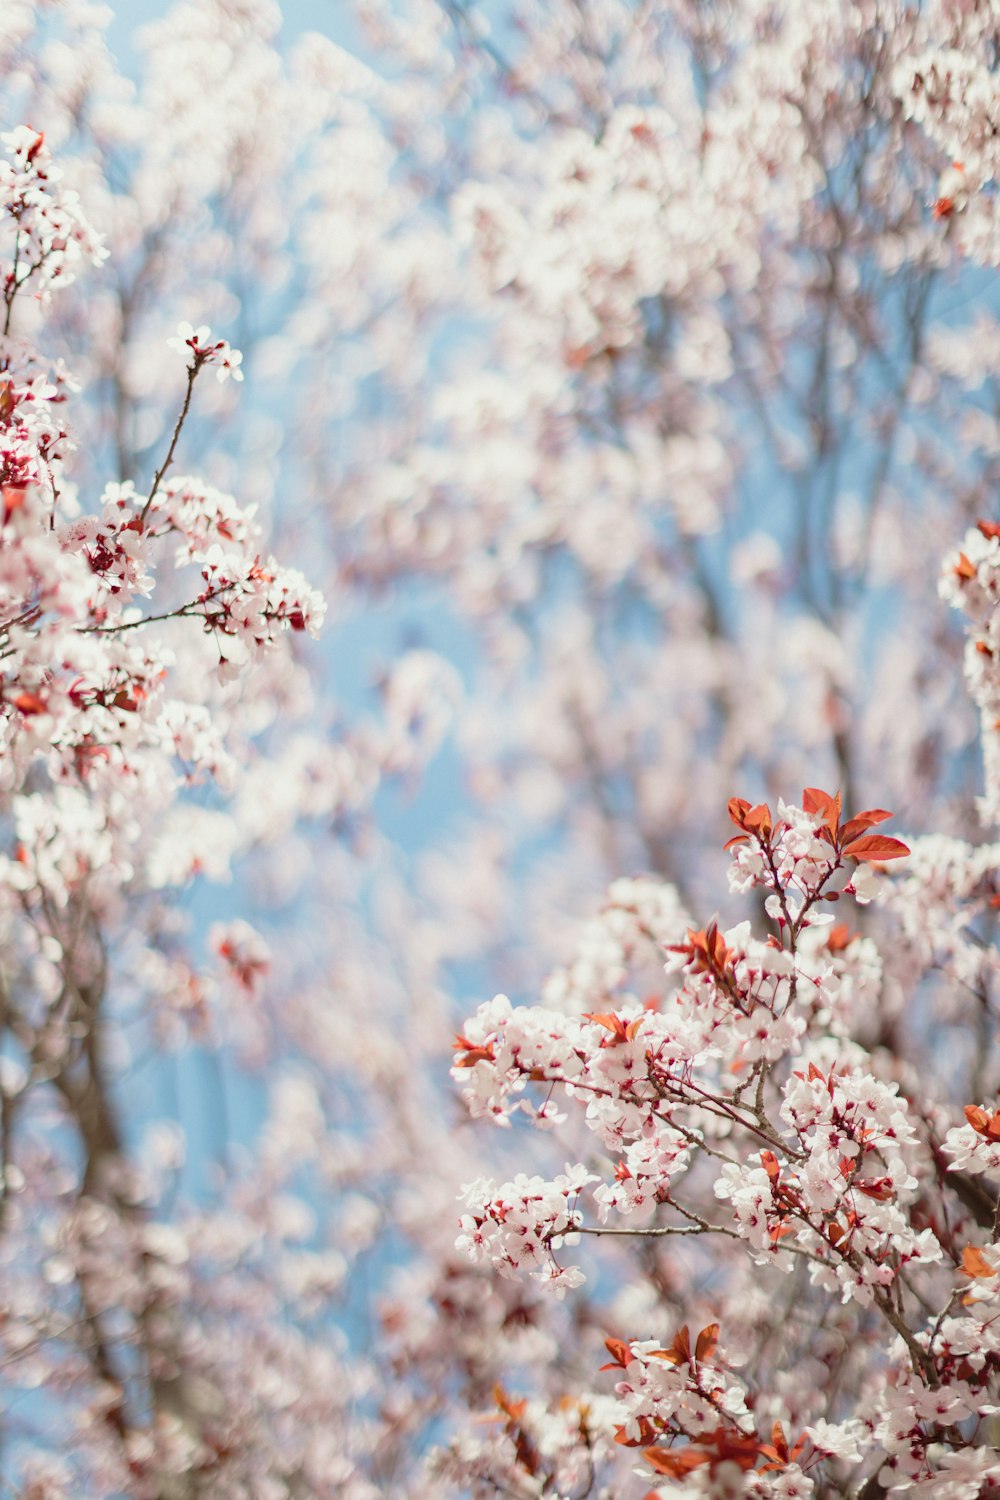 a tree with white and red flowers and blue sky in the background